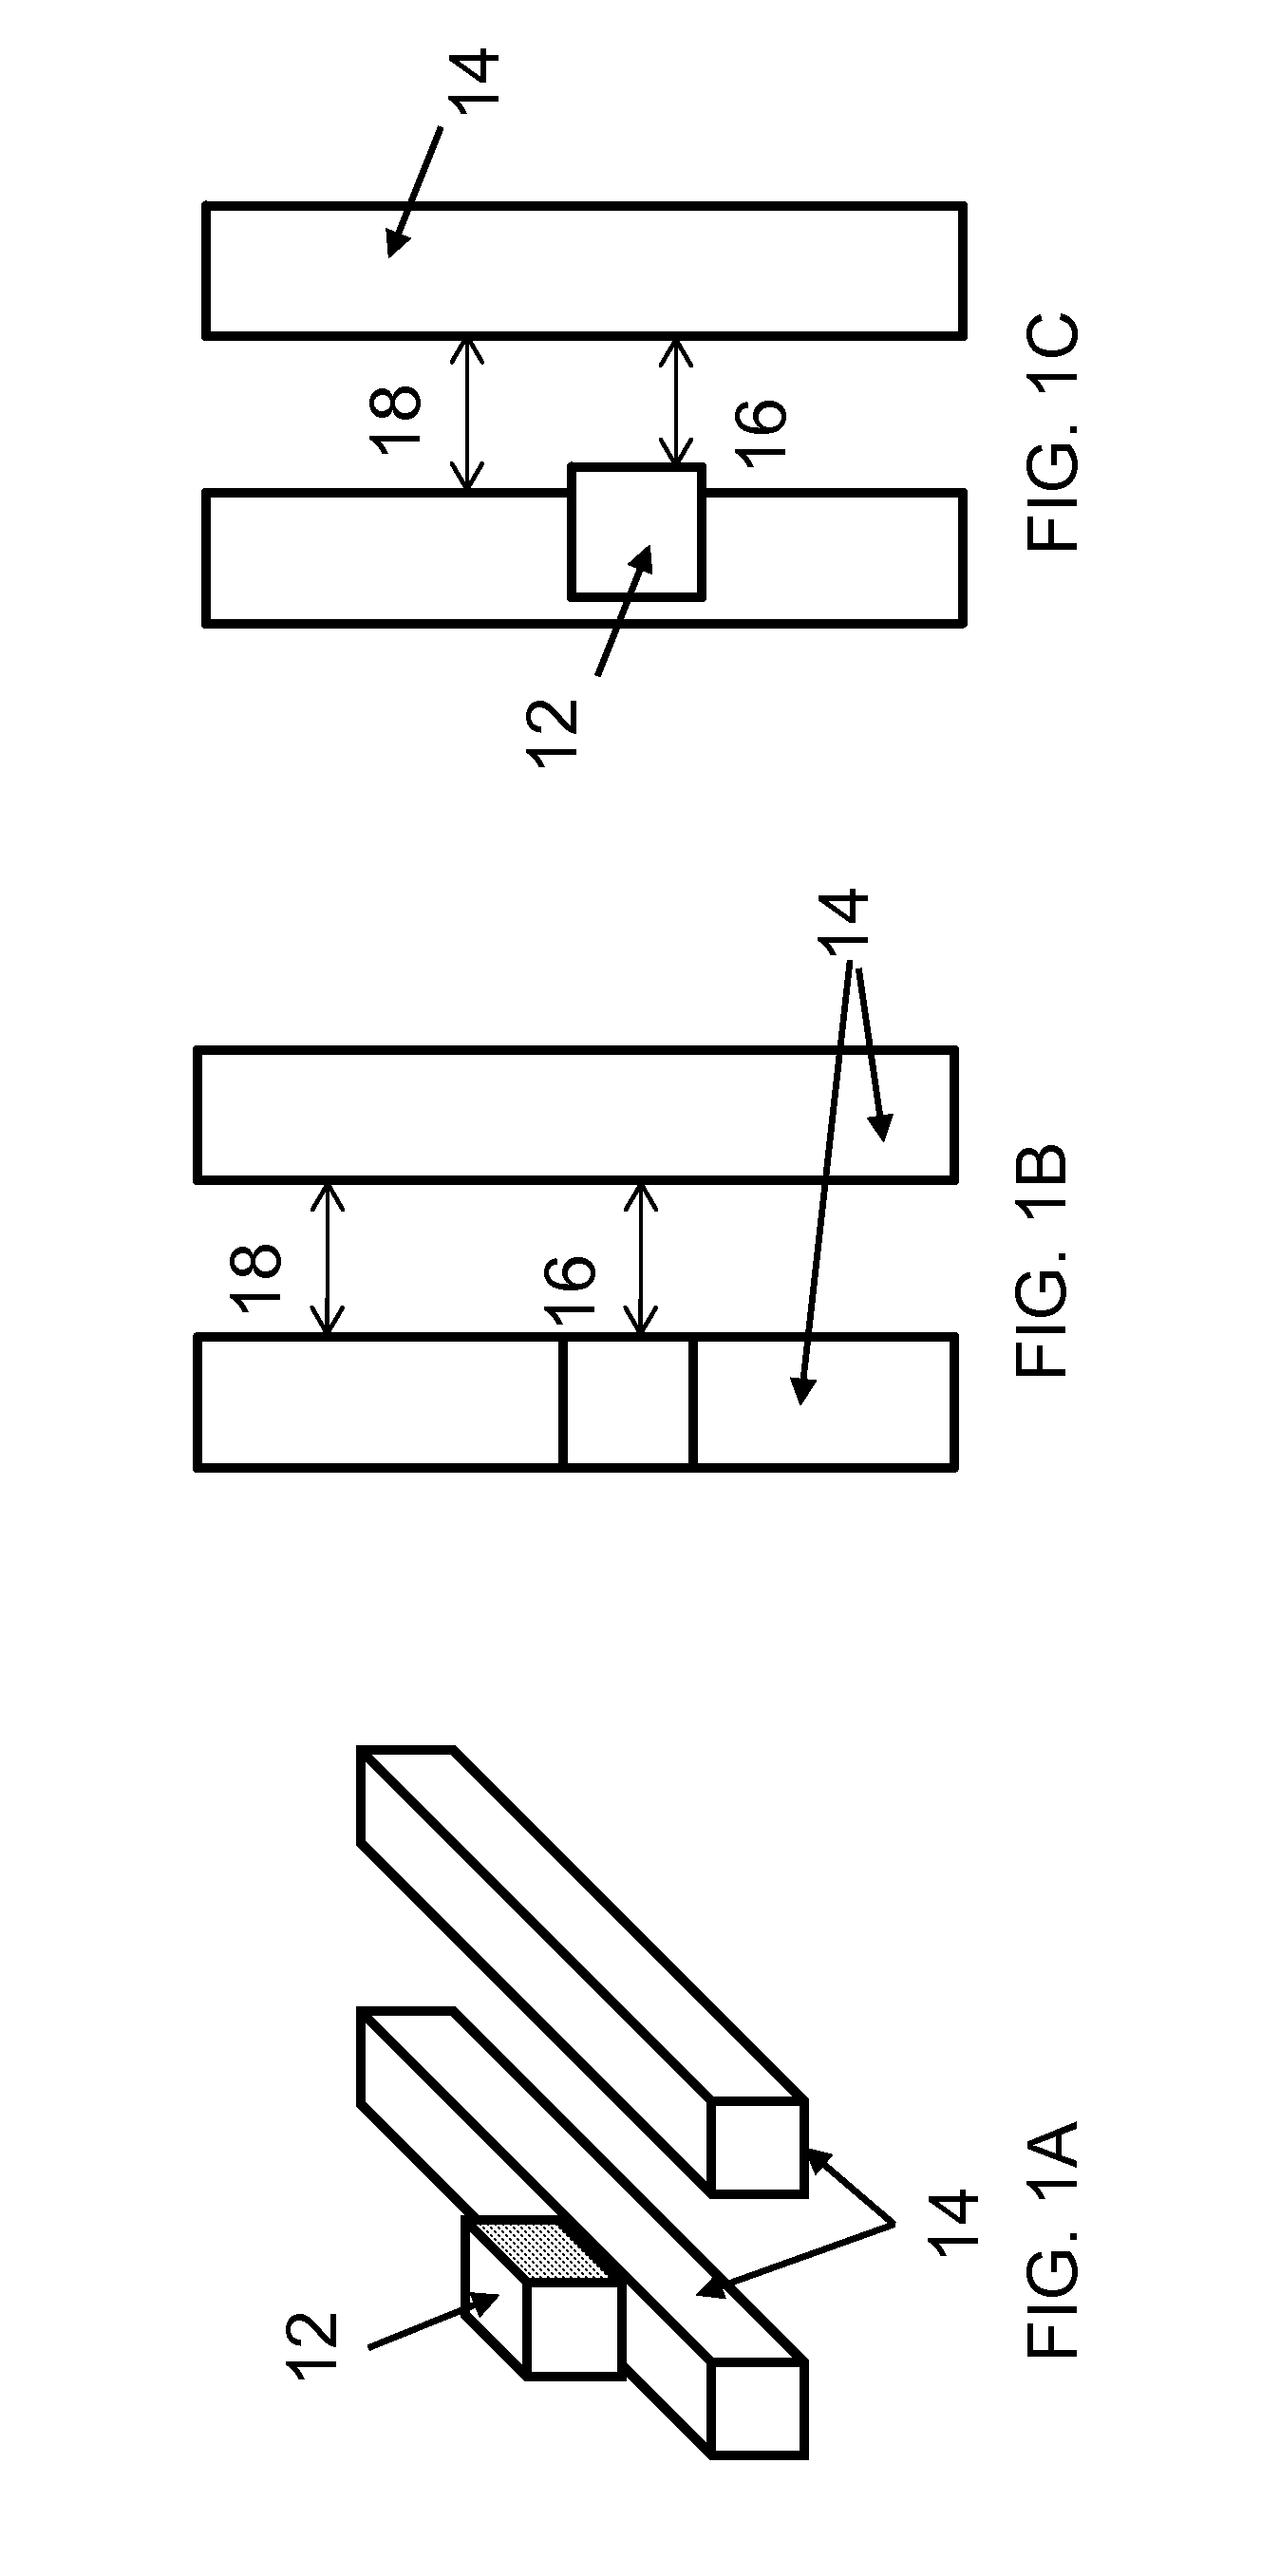 IC layout adjustment method and tool for improving dielectric reliability at interconnects